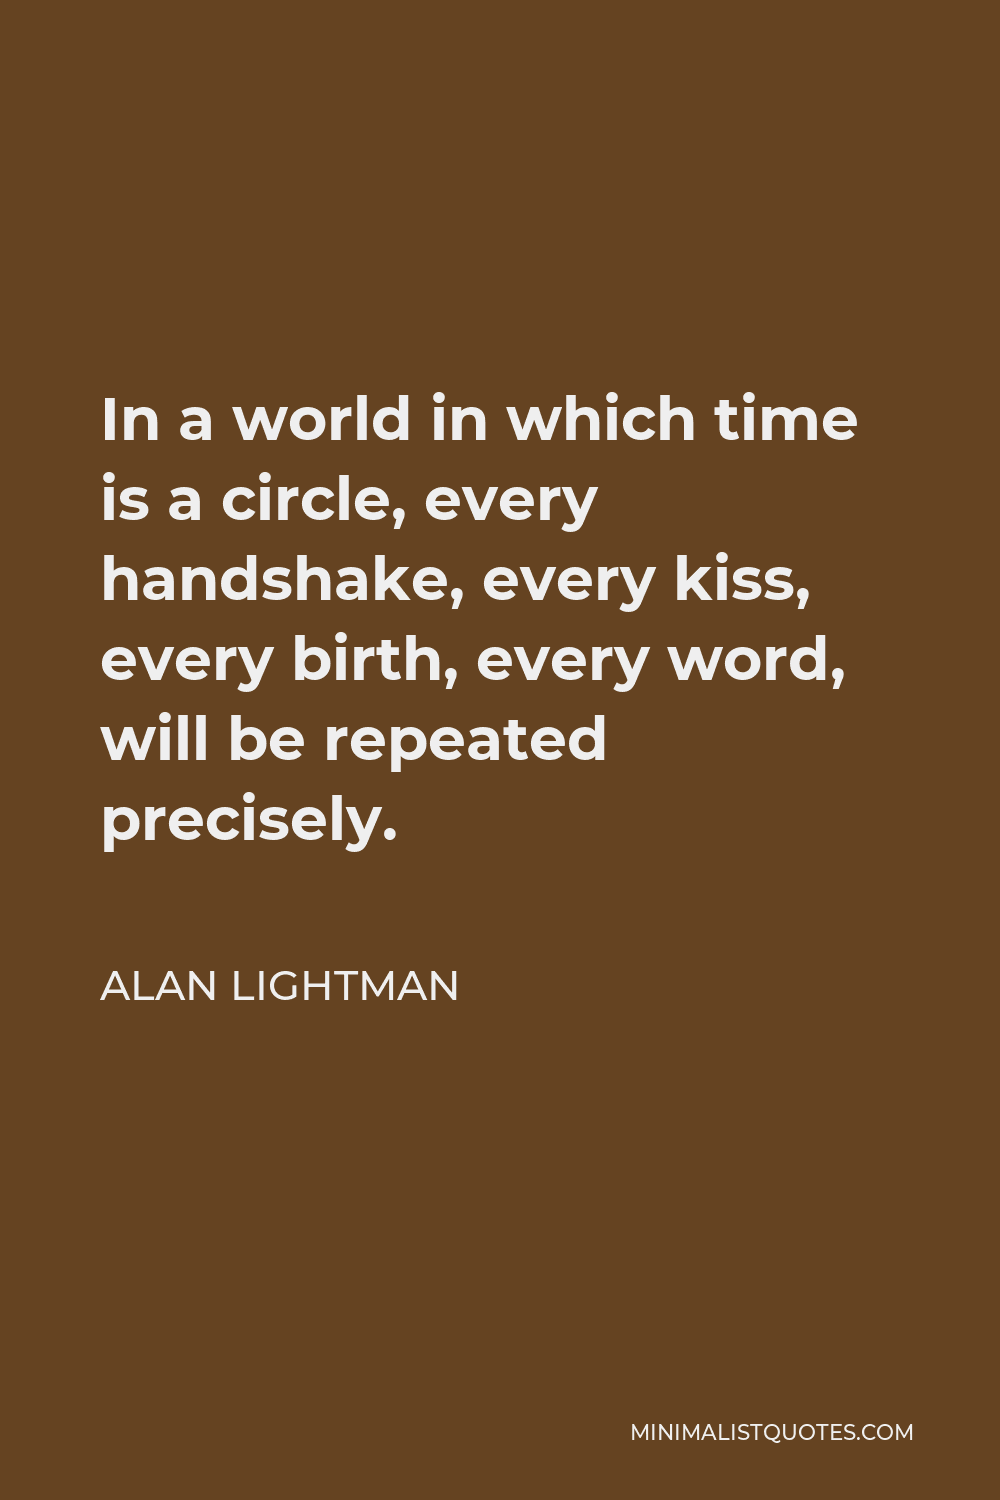 Alan Lightman Quote - In a world in which time is a circle, every handshake, every kiss, every birth, every word, will be repeated precisely.